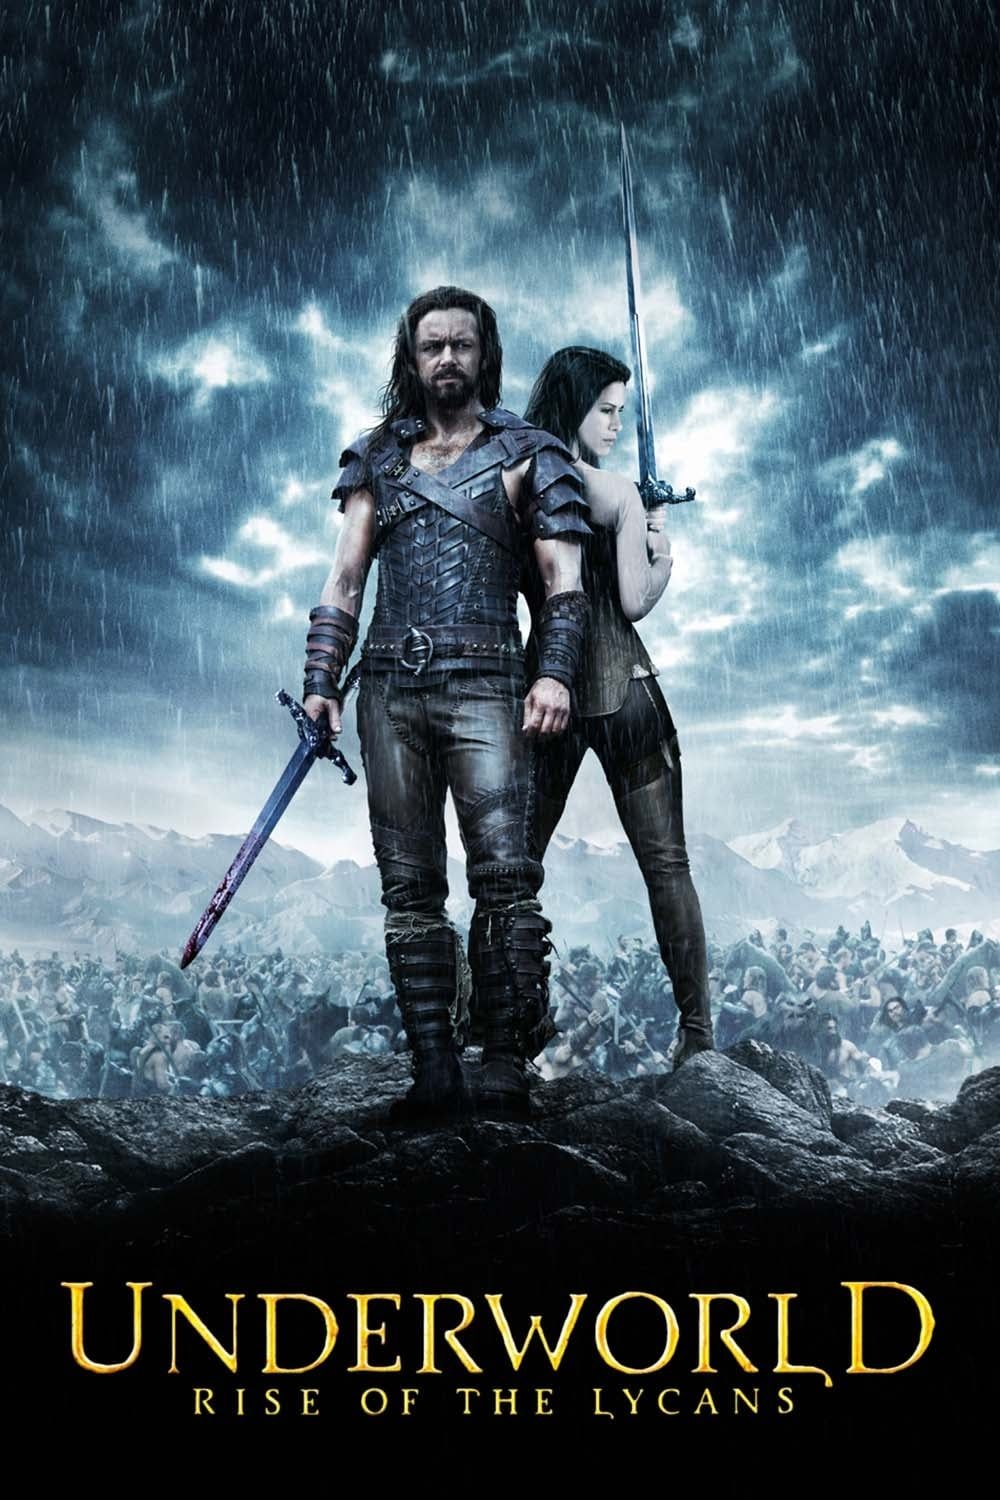 Underworld 3: The Rise of The Lycans